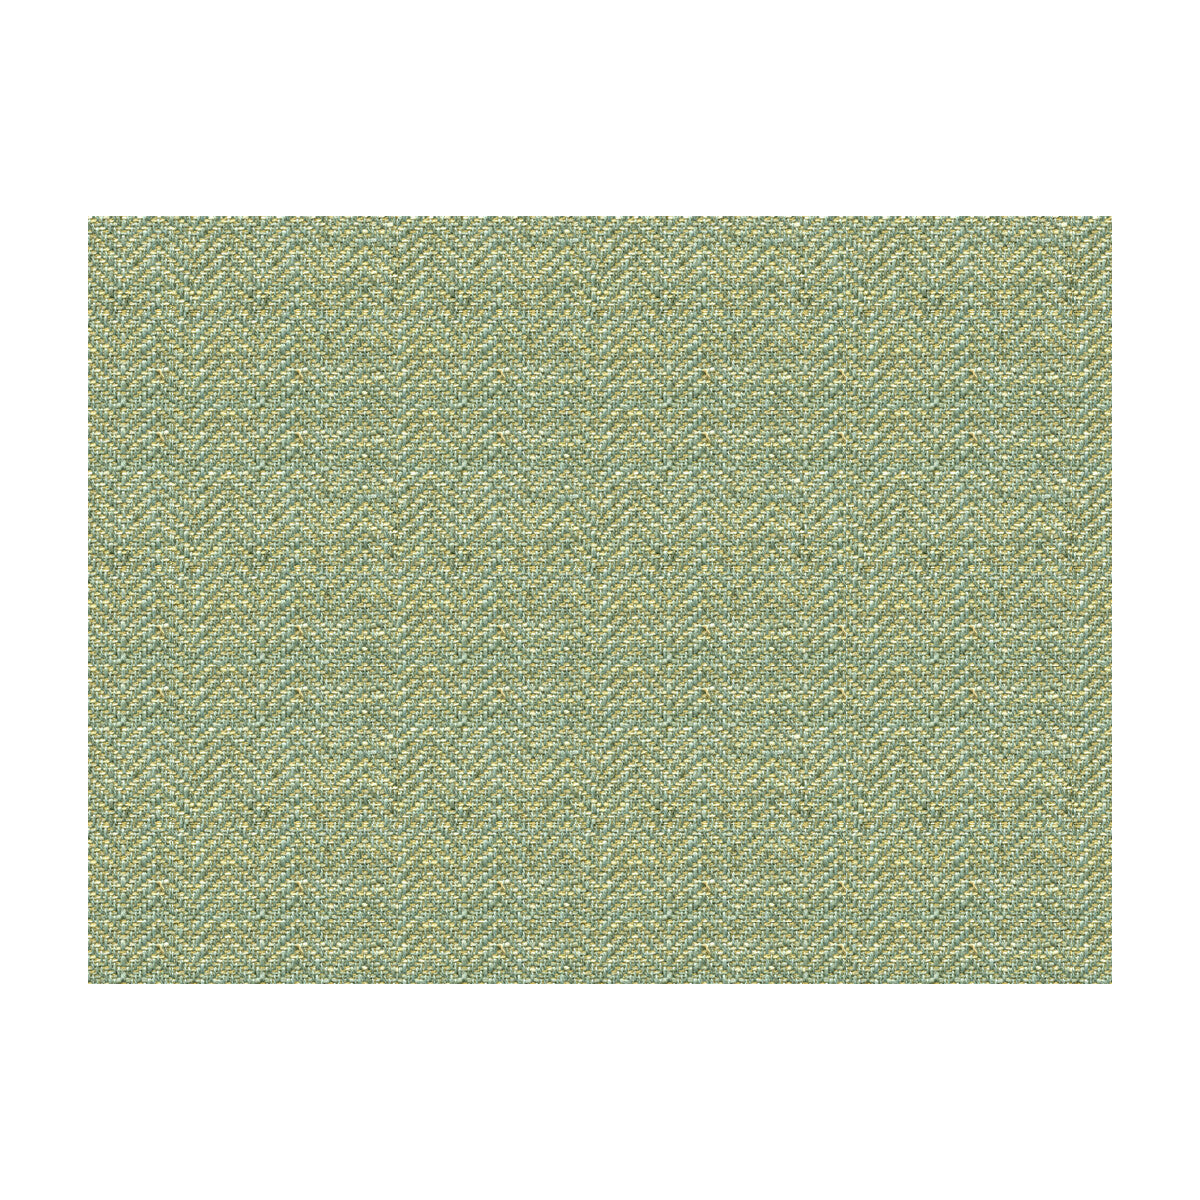 Keep True fabric in horizon color - pattern 28881.1635.0 - by Kravet Couture in the Modern Colors II collection